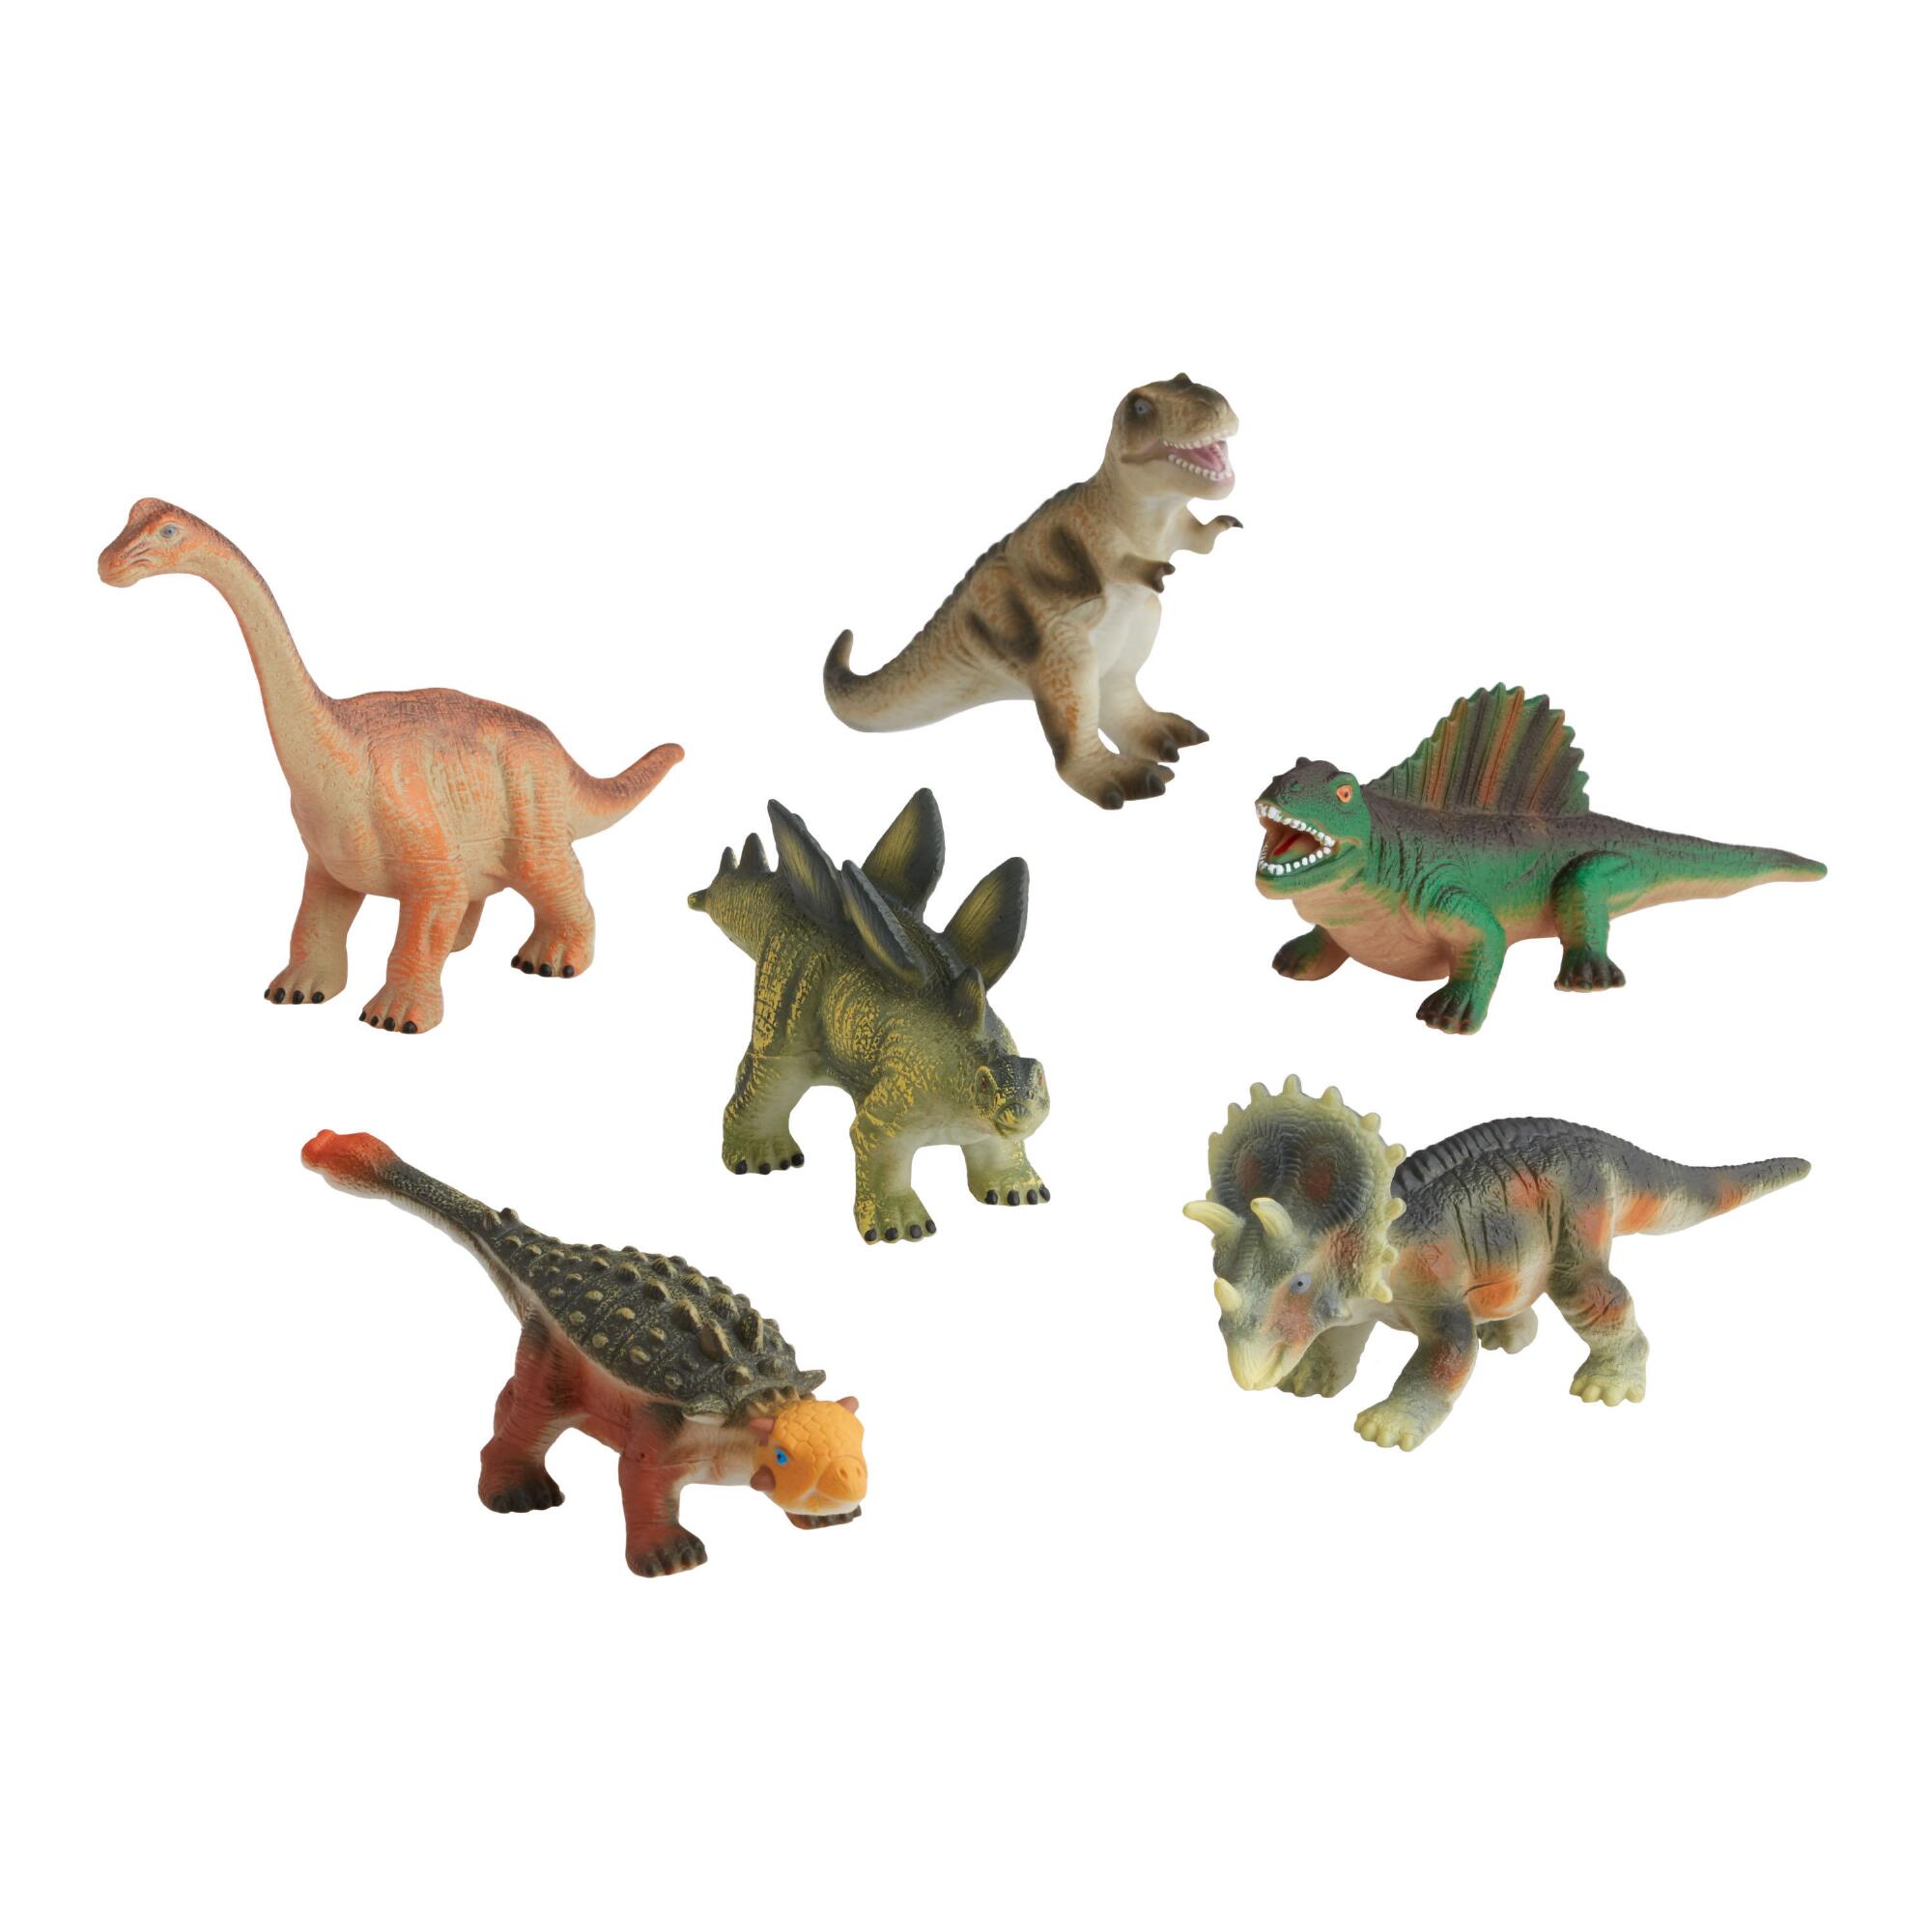 Squeezable Dinosaurs Set of 6 by World Market